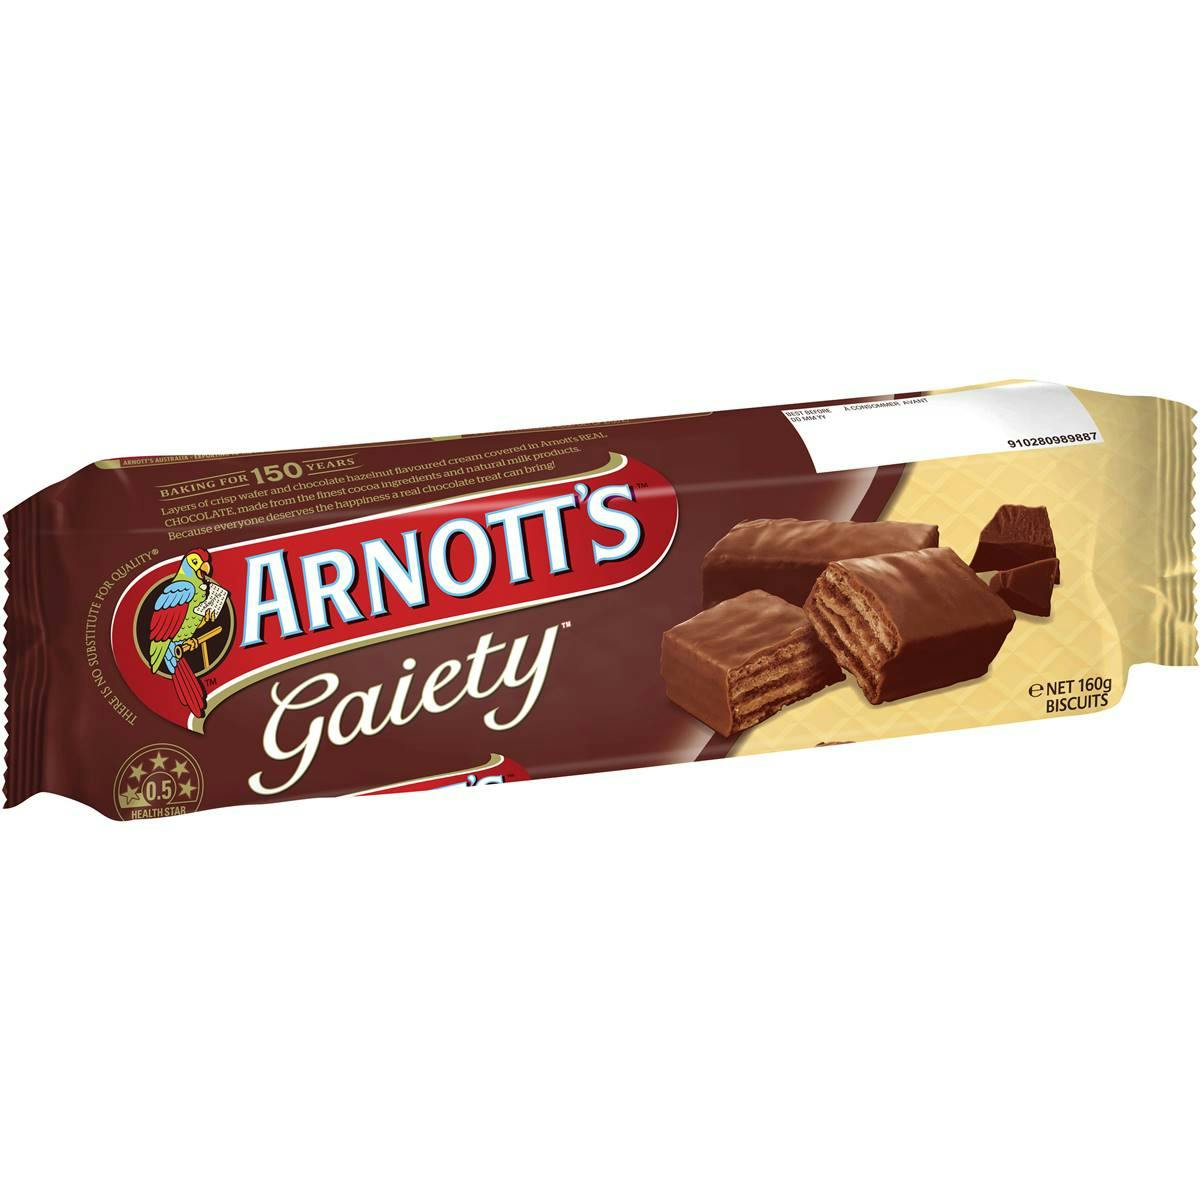 Arnott's Gaiety Chocolate Wafer Biscuits